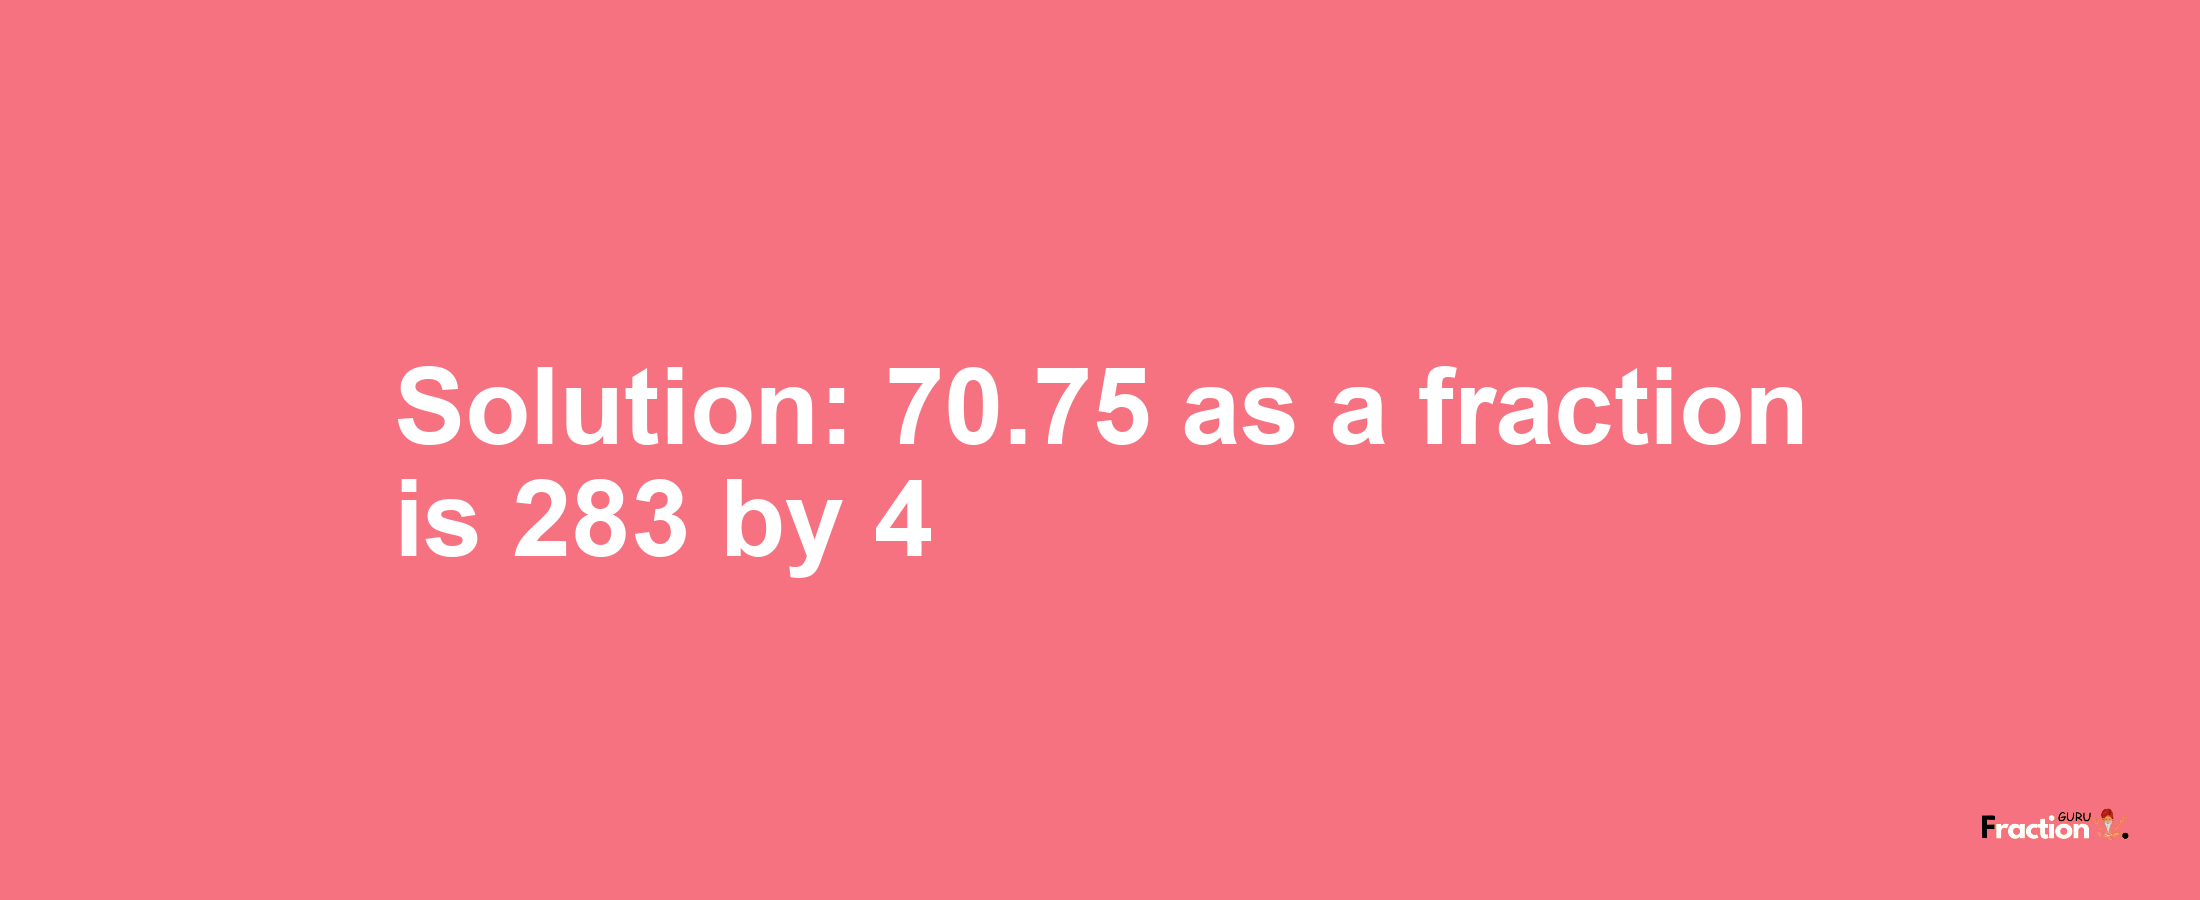 Solution:70.75 as a fraction is 283/4